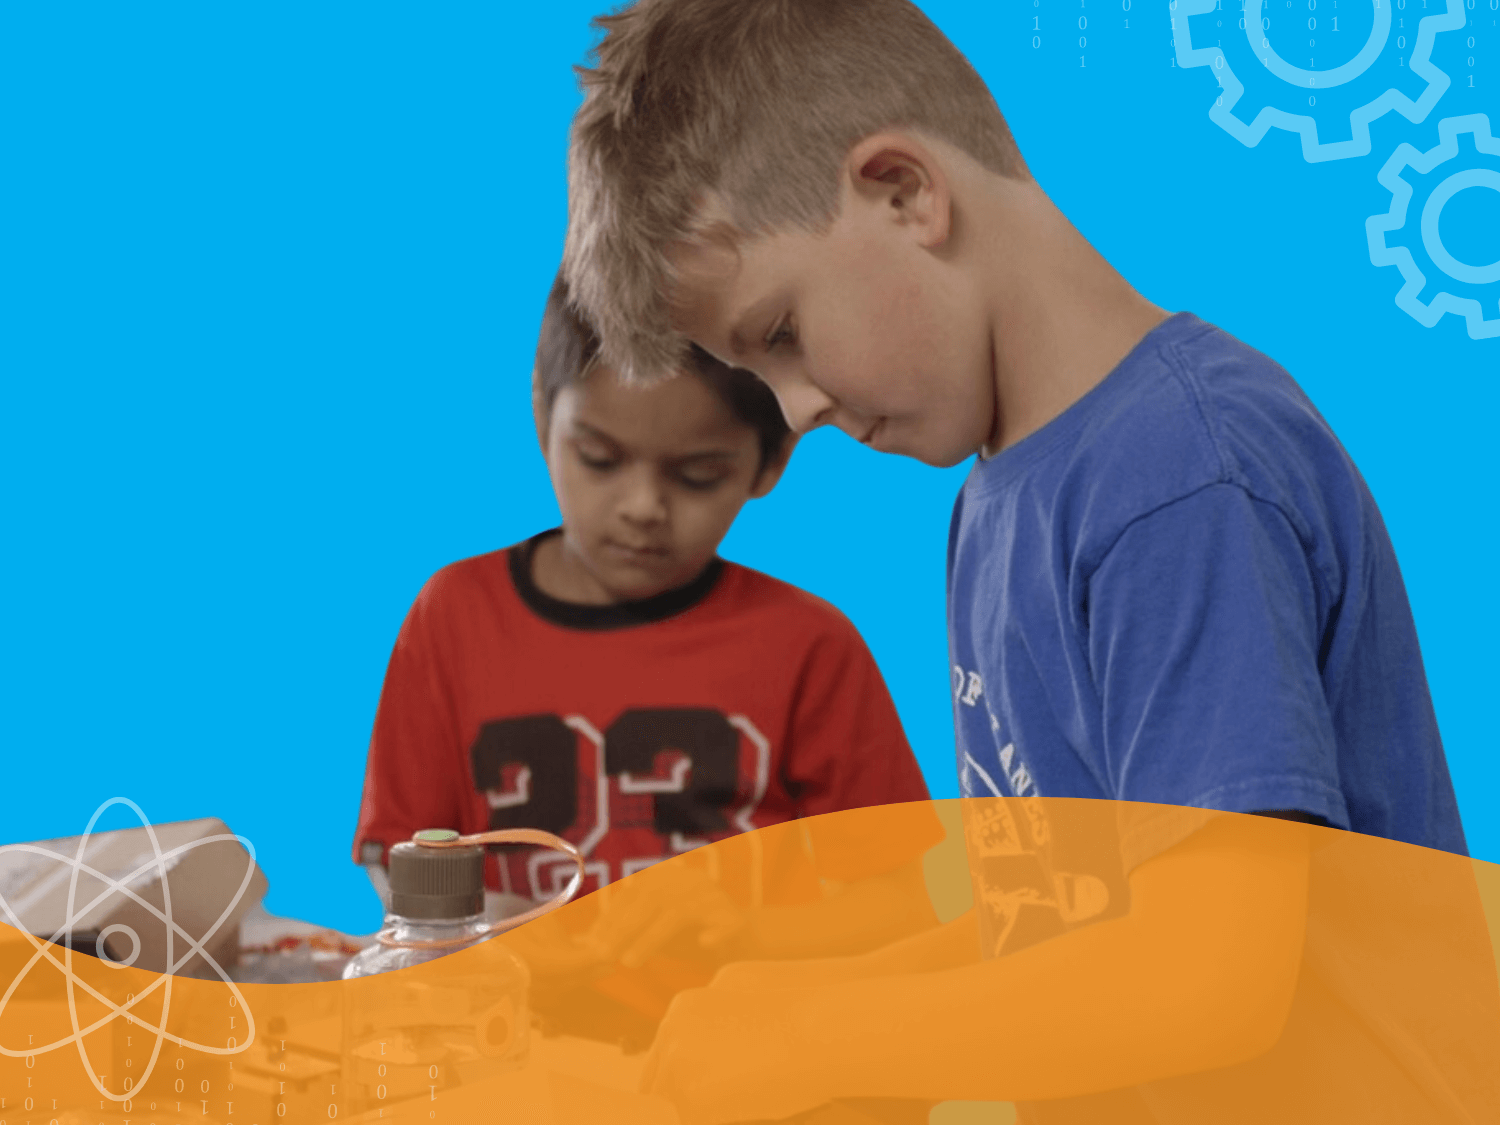 How to Effectively Assess Teamwork During STEM Projects (and STEAM)